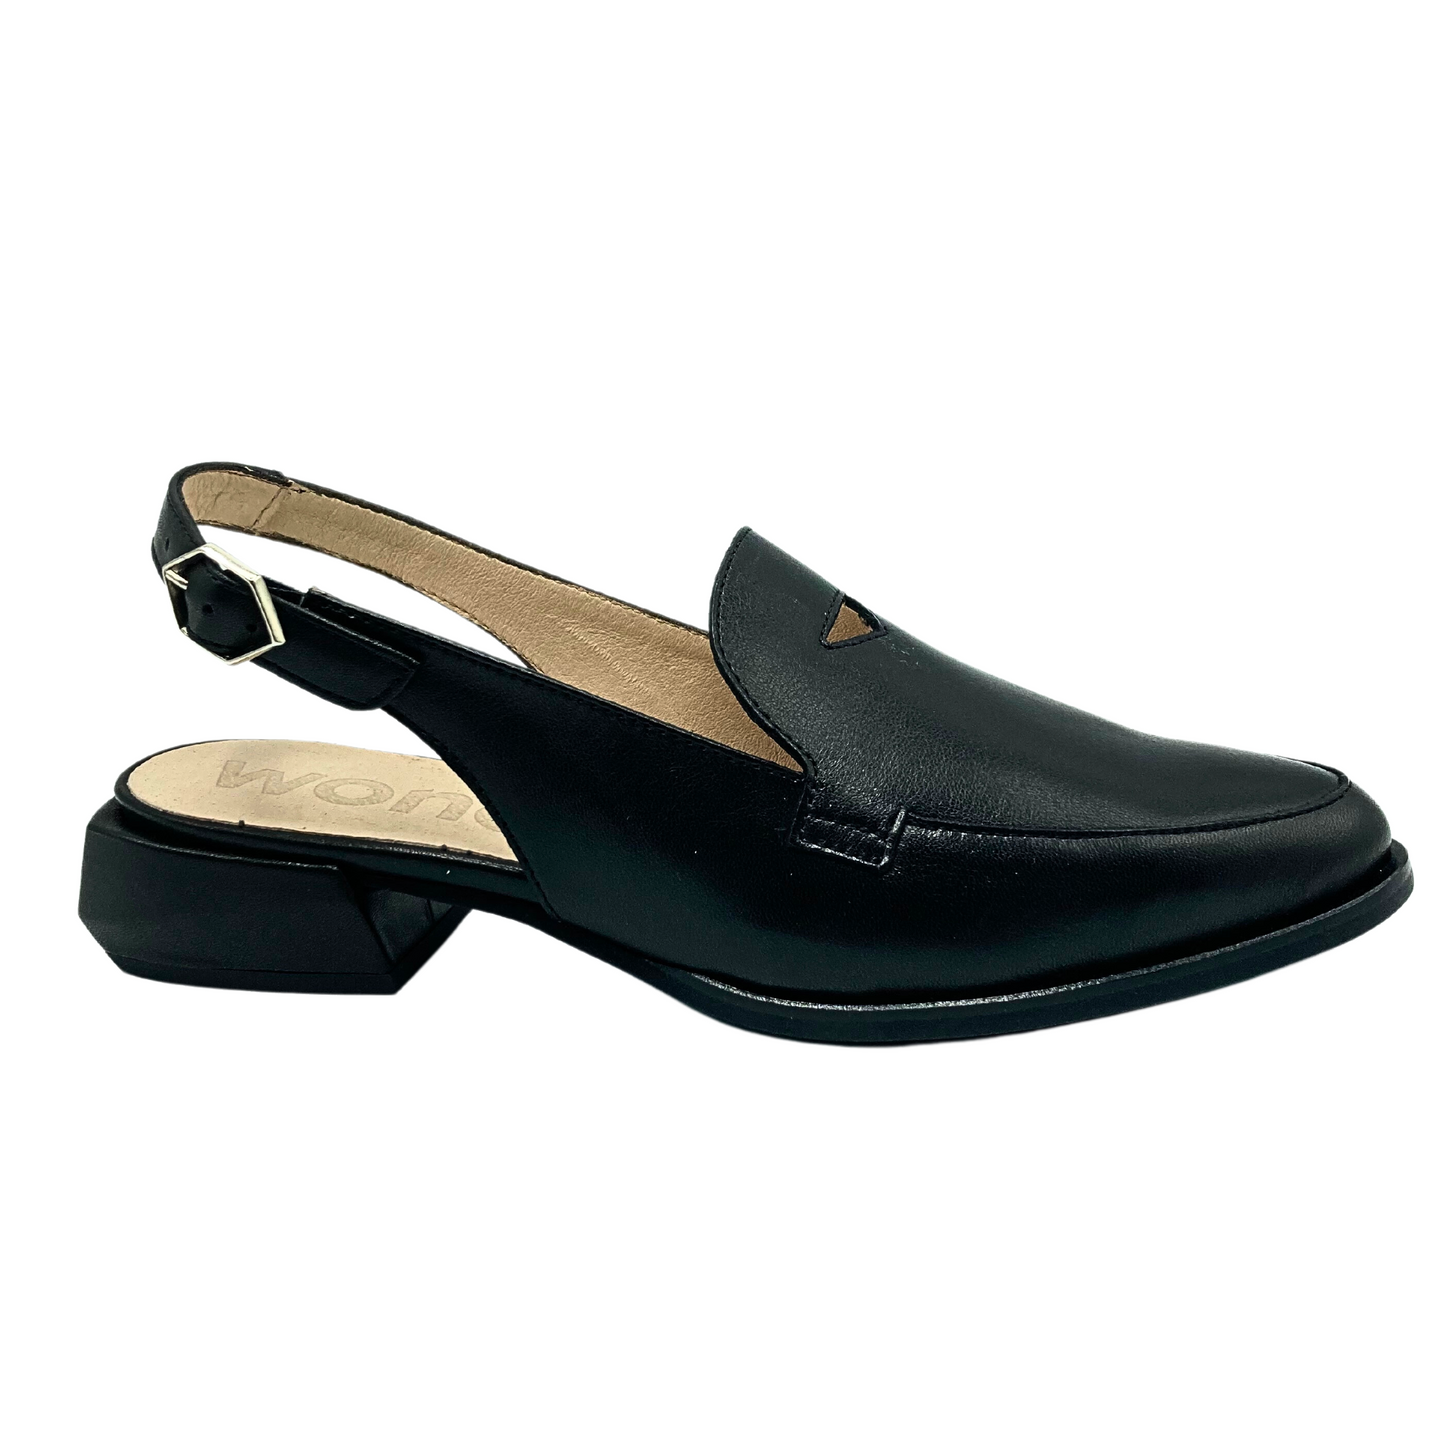 Outside view of a classic slingback loafer.  Closed toe in front and open heel with adjustable strap